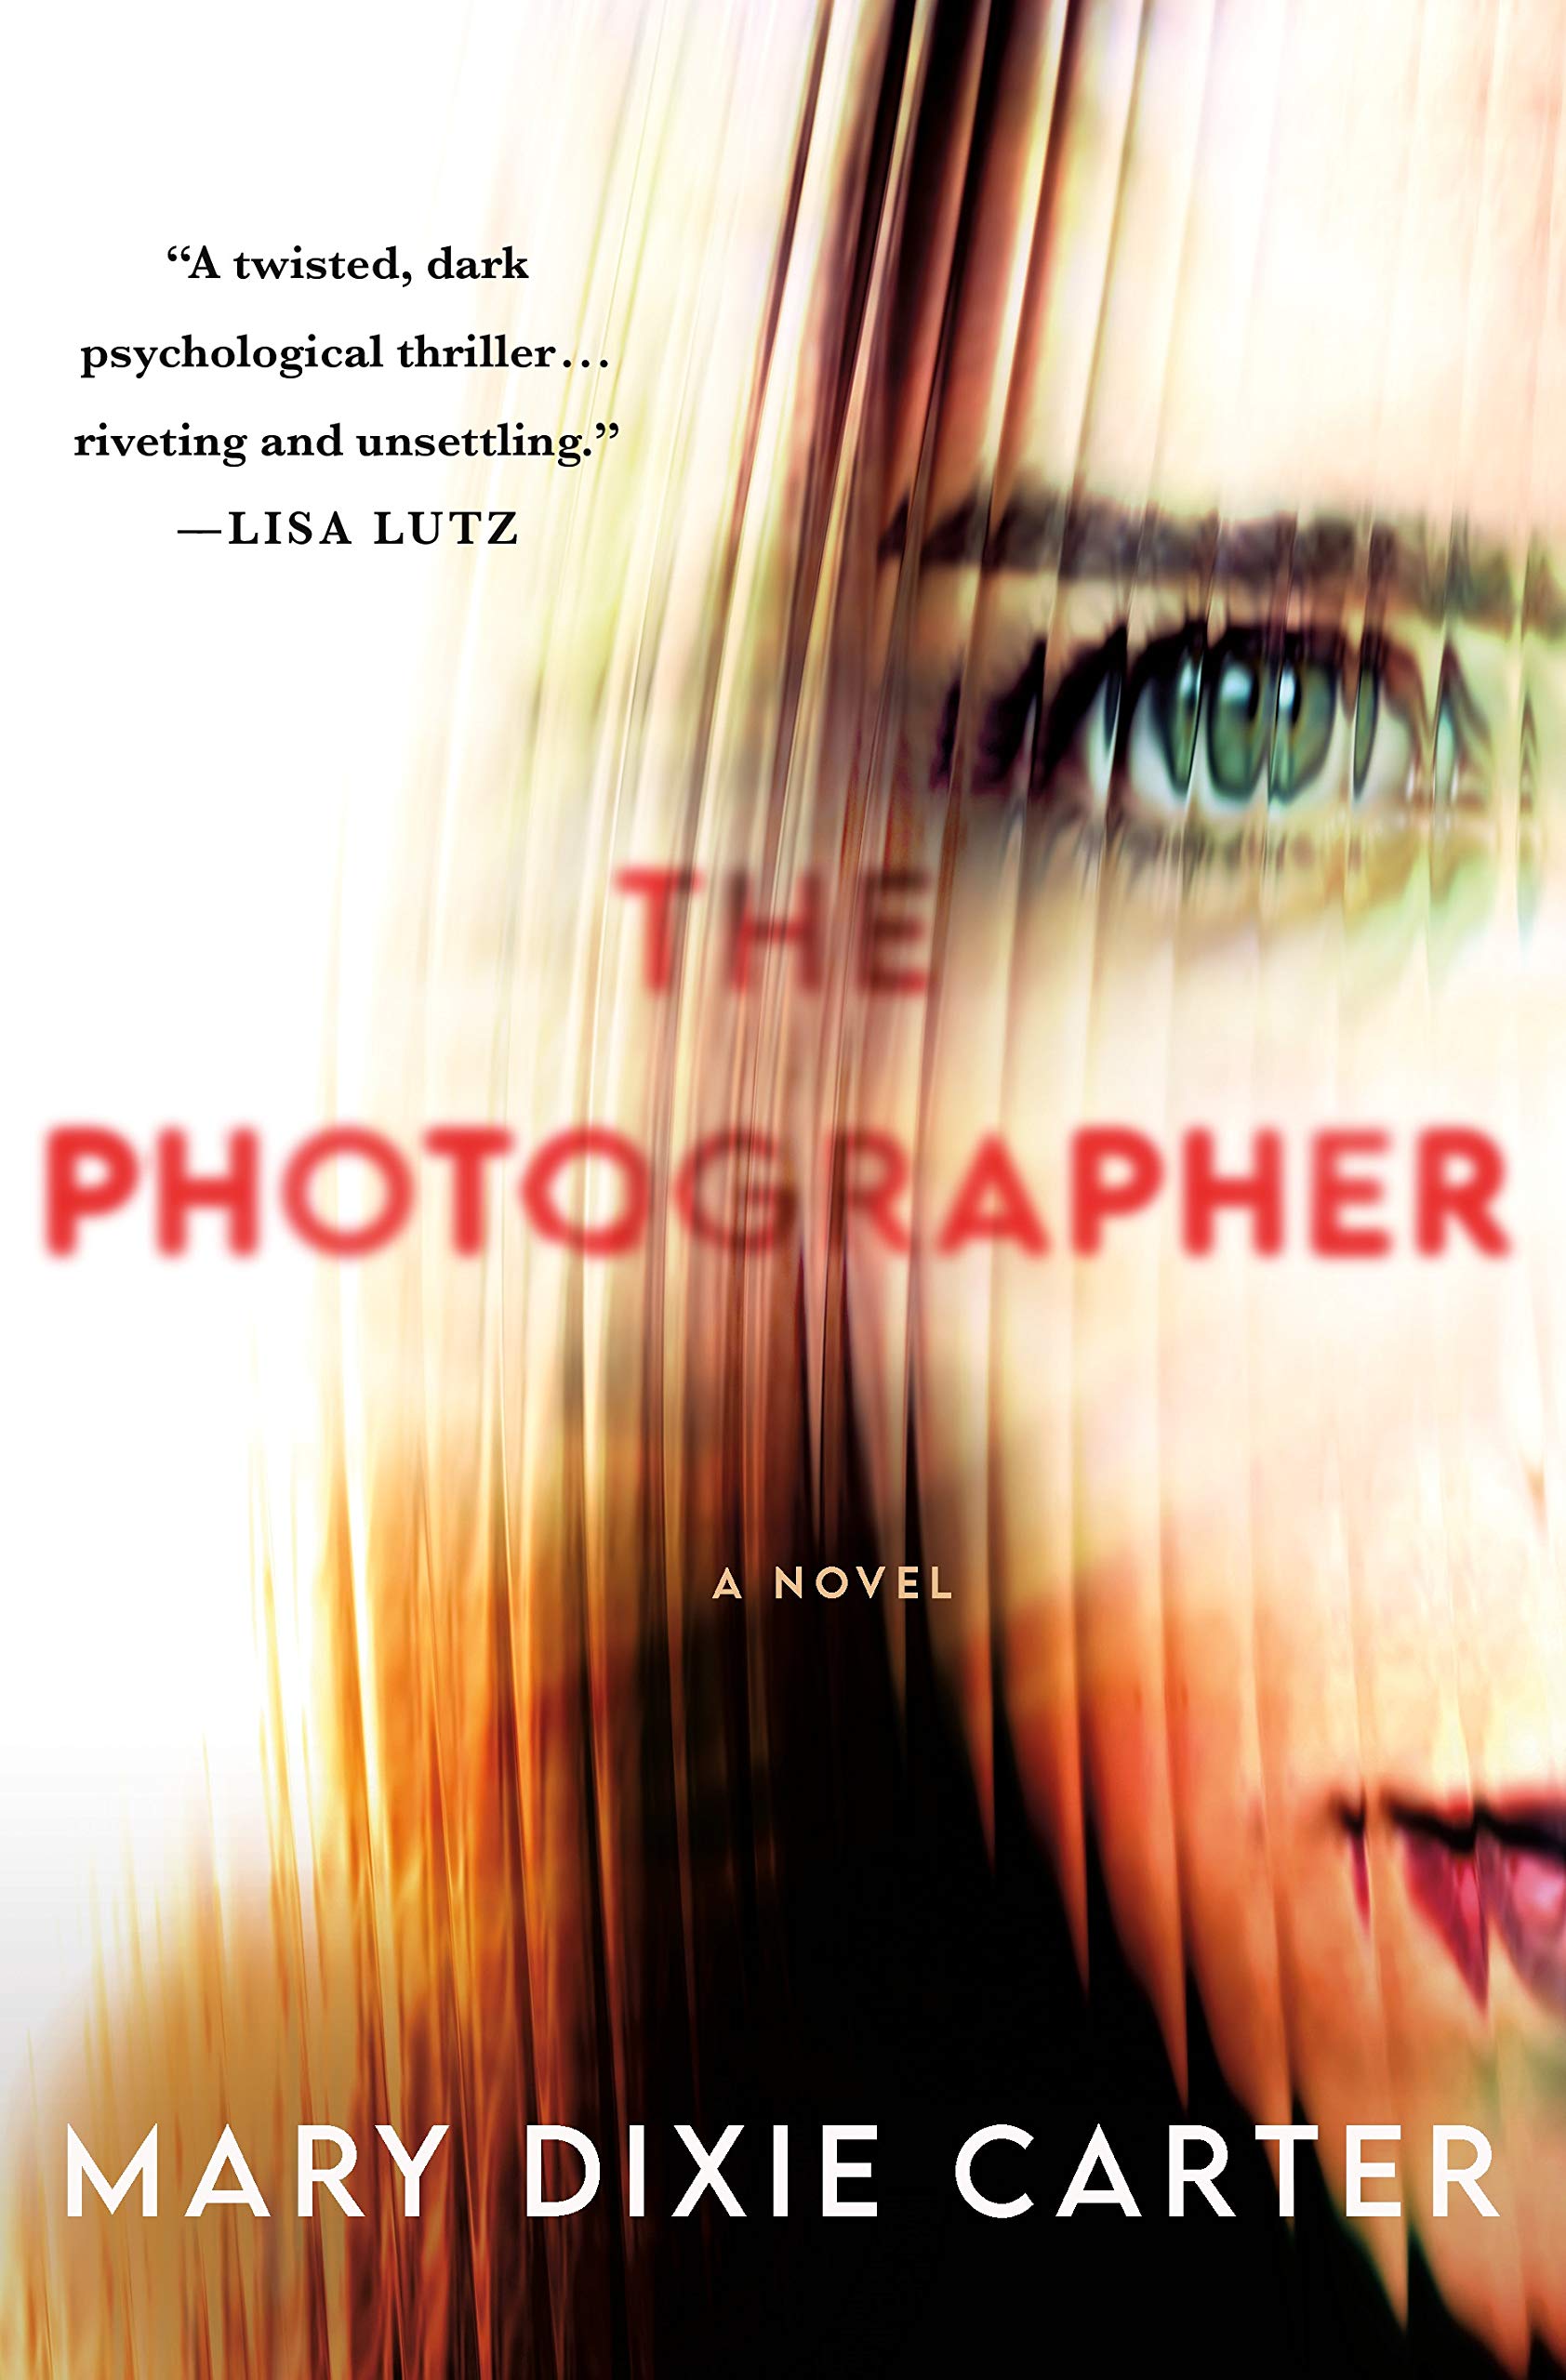 The Photographer by Mary Dixie Carter book review